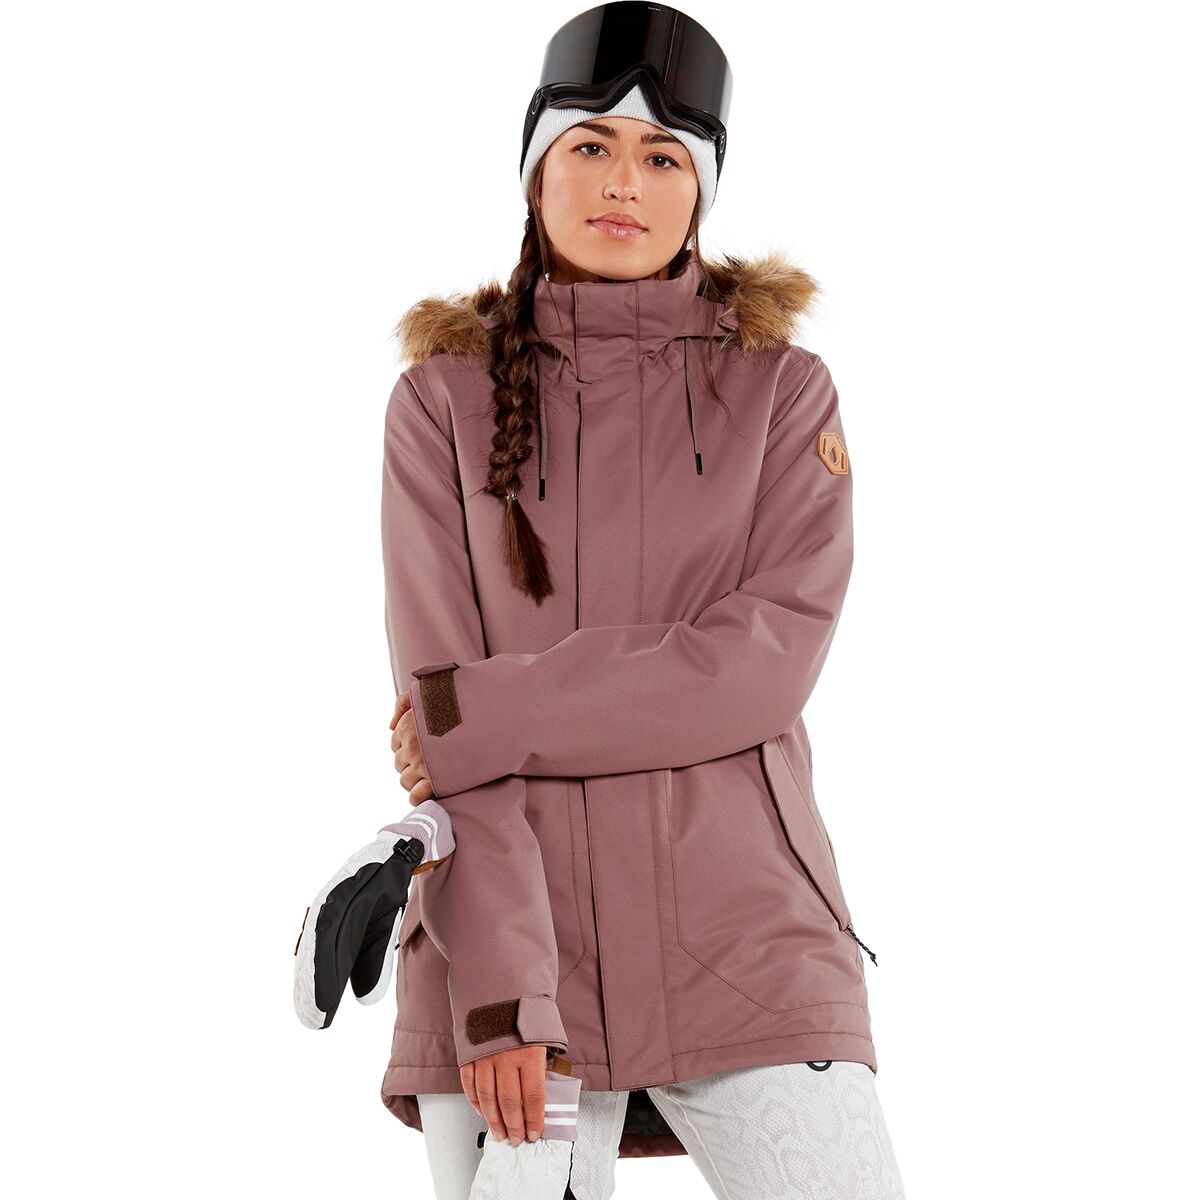 Fawn Insulated Jacket - Women